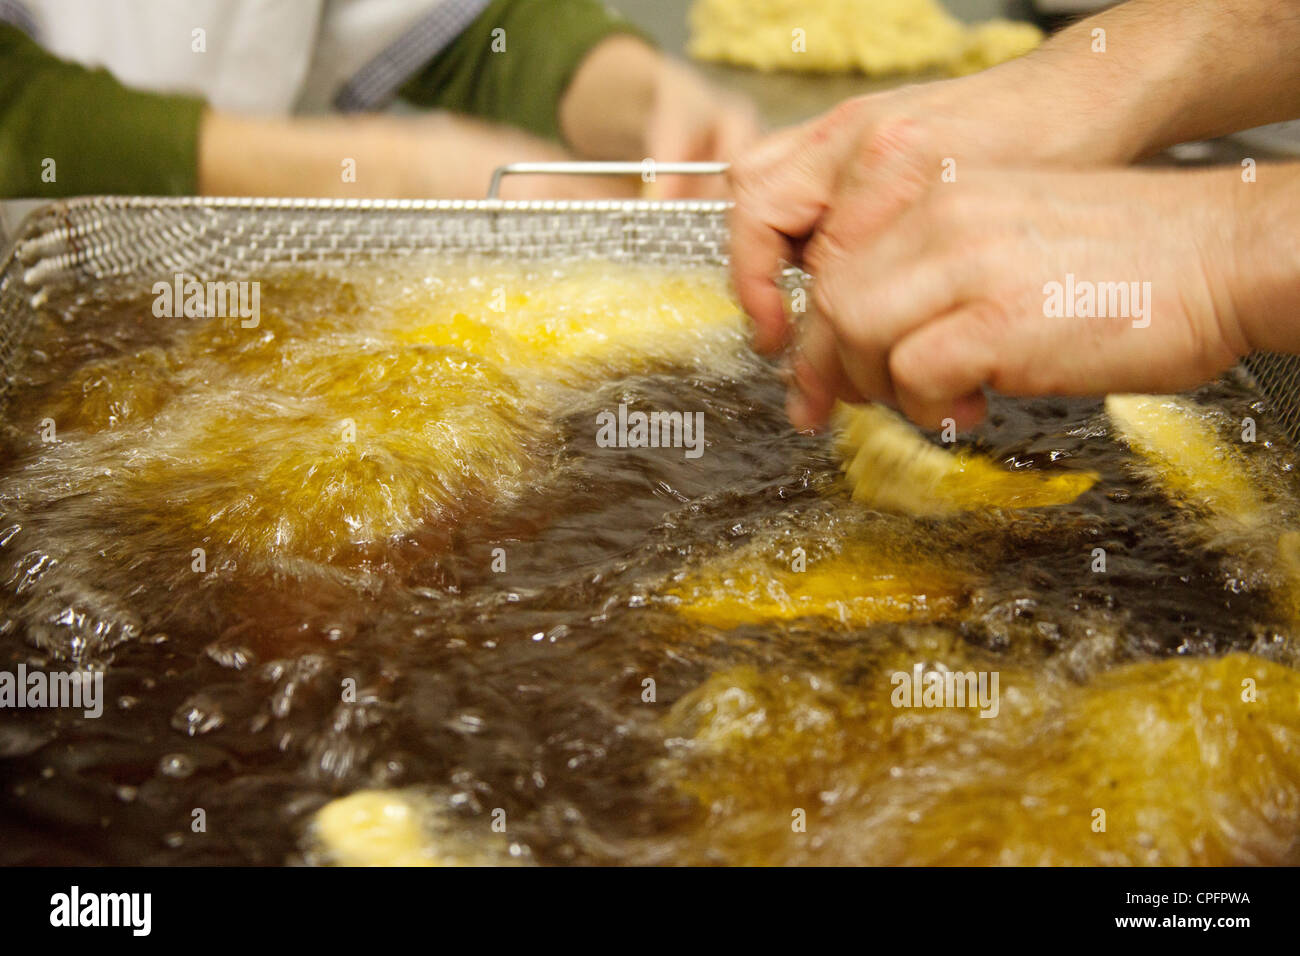 Elaboration artisanal pastry fritters La Antequerana in Antequera Malaga Andalusia Spain Stock Photo